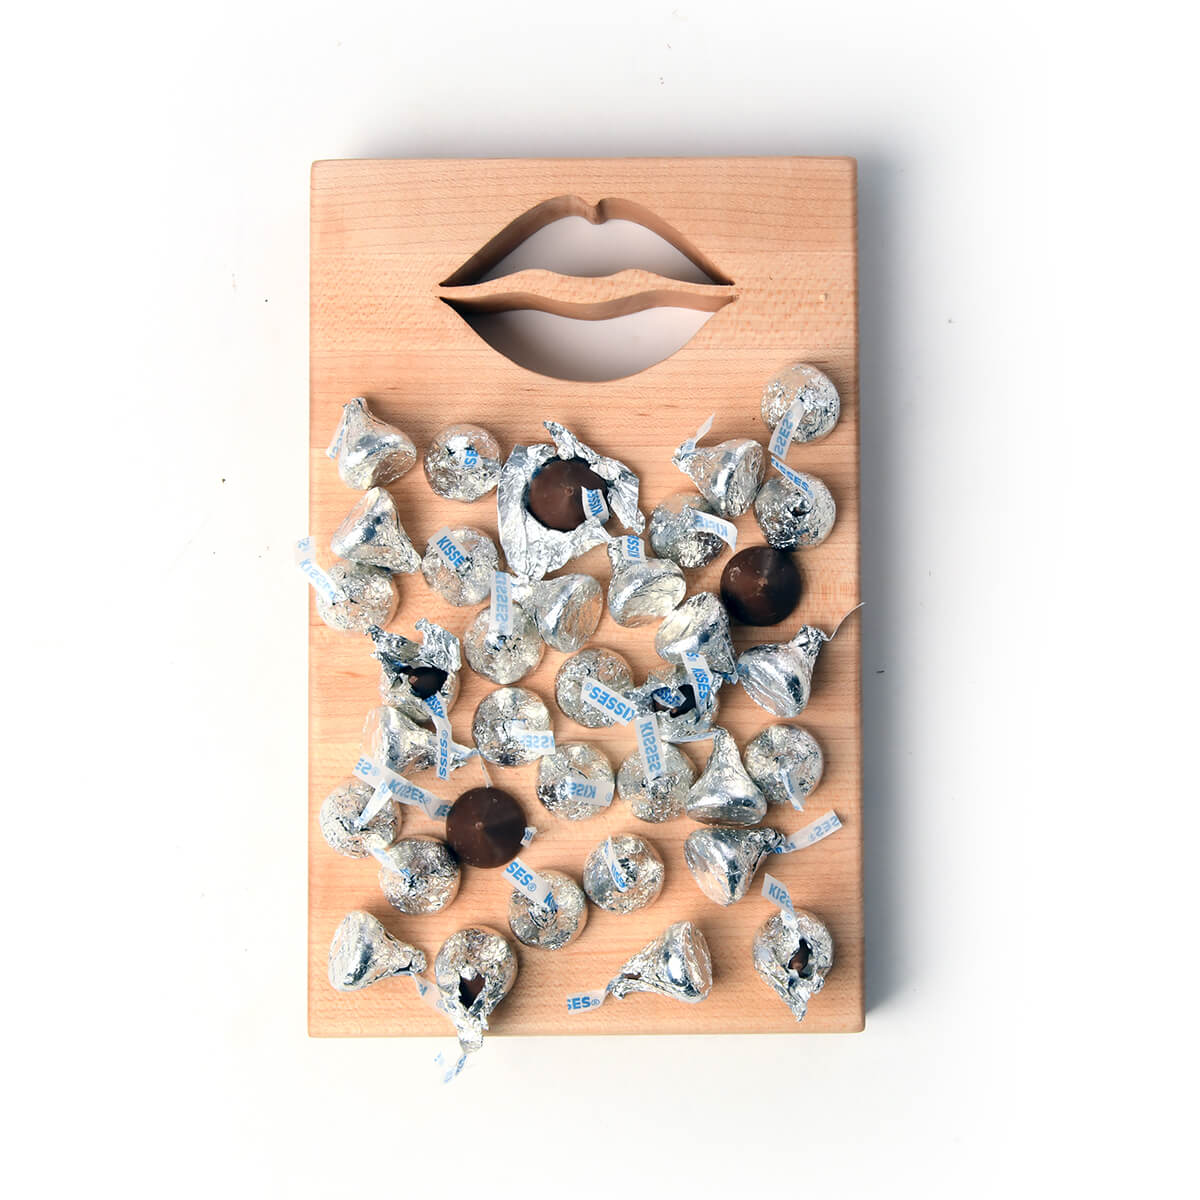 xsmall wood cutting board with the shape of lips cut out